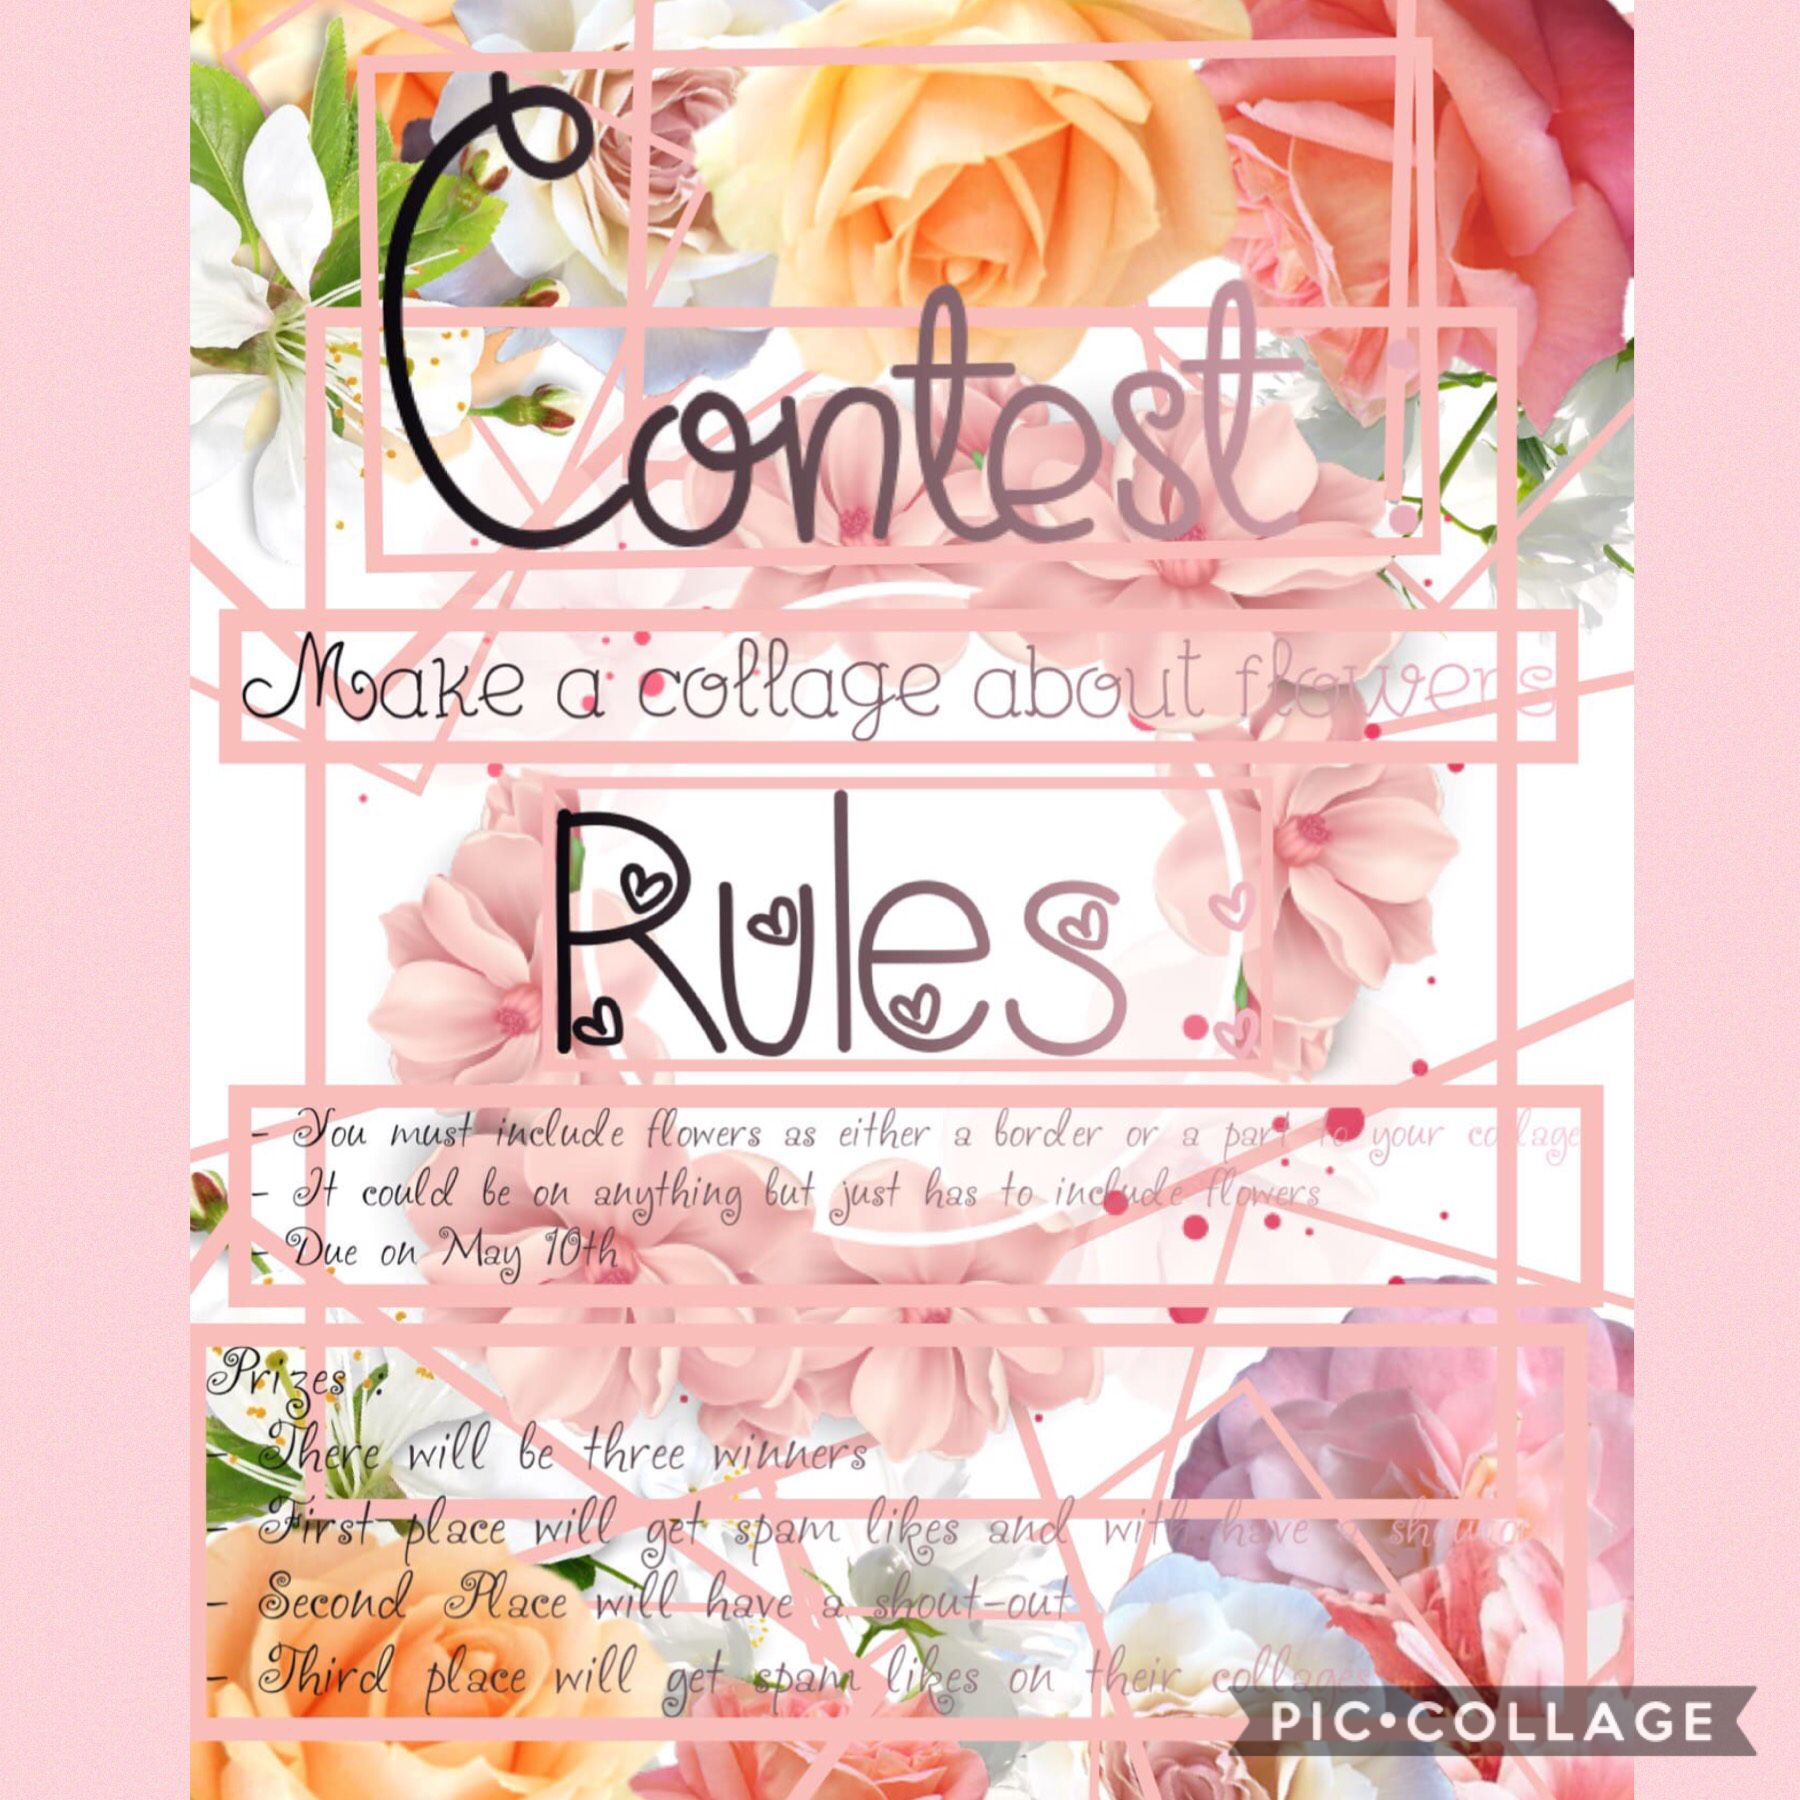 Peeps guys and participate and my friends contest! Her name is Rose-Cr3me